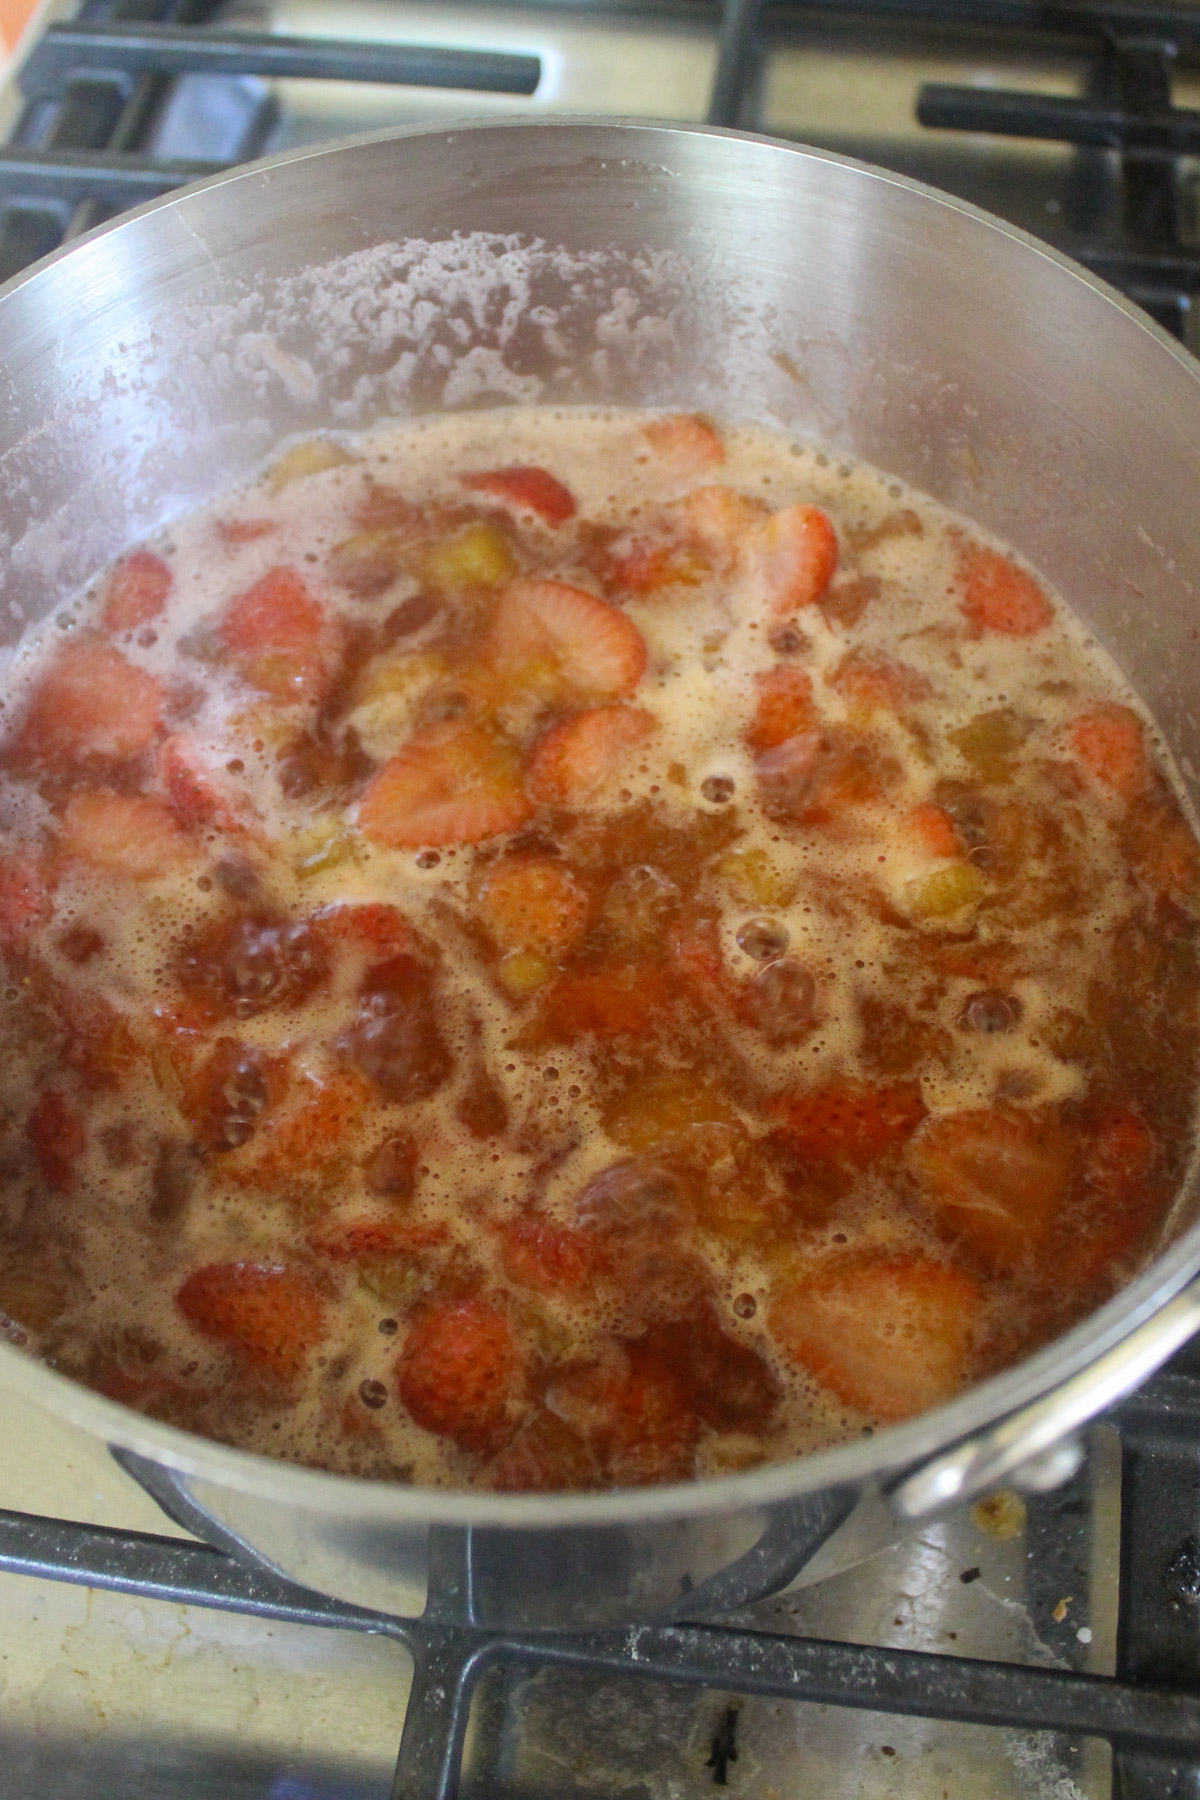 Strawberry Rhubarb Sauce simmering in a pot on the stove.